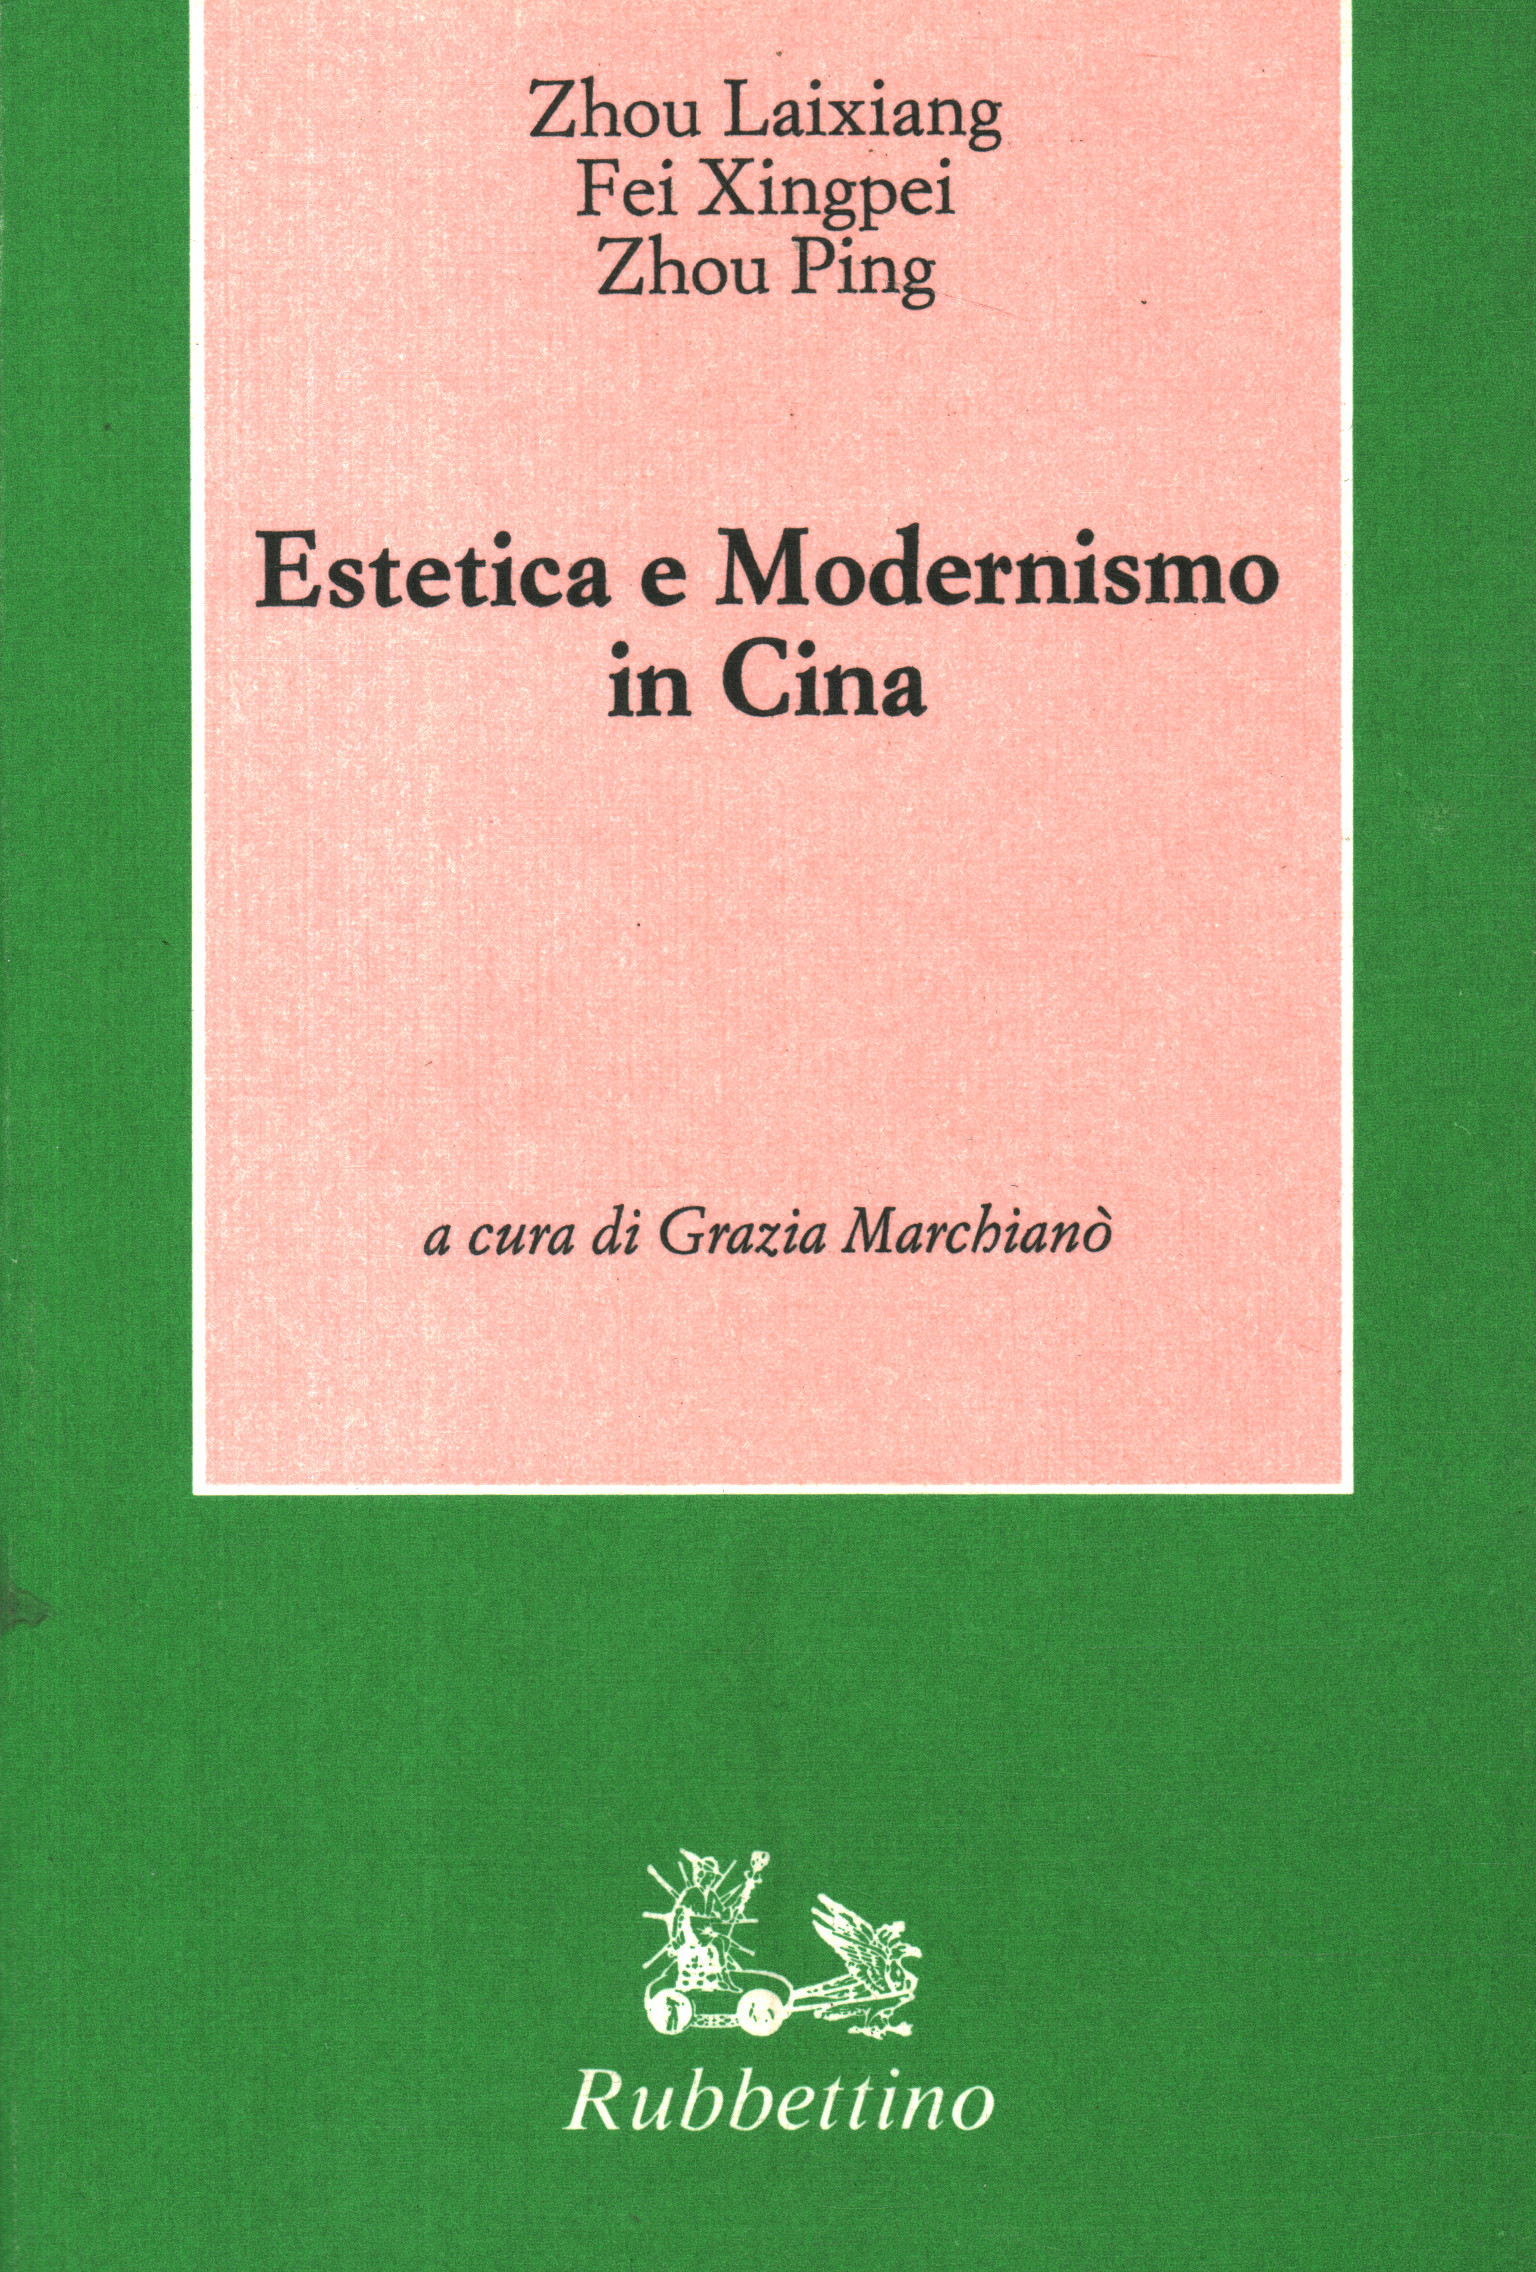 Aesthetics and Modernism in China